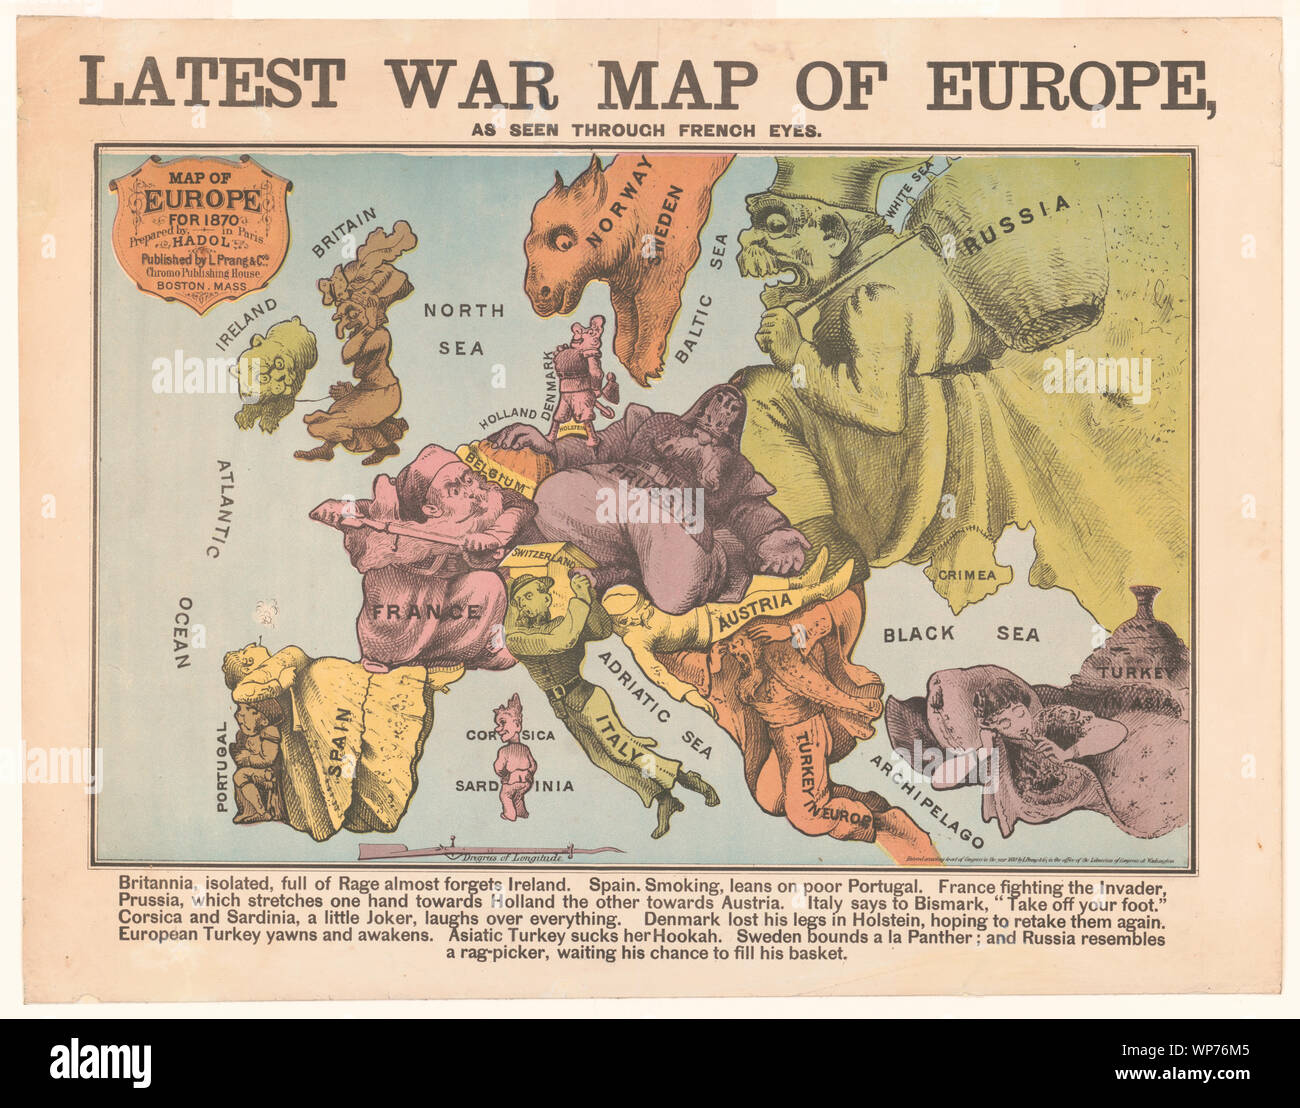 Latest War Map Of Europe WP76M5 